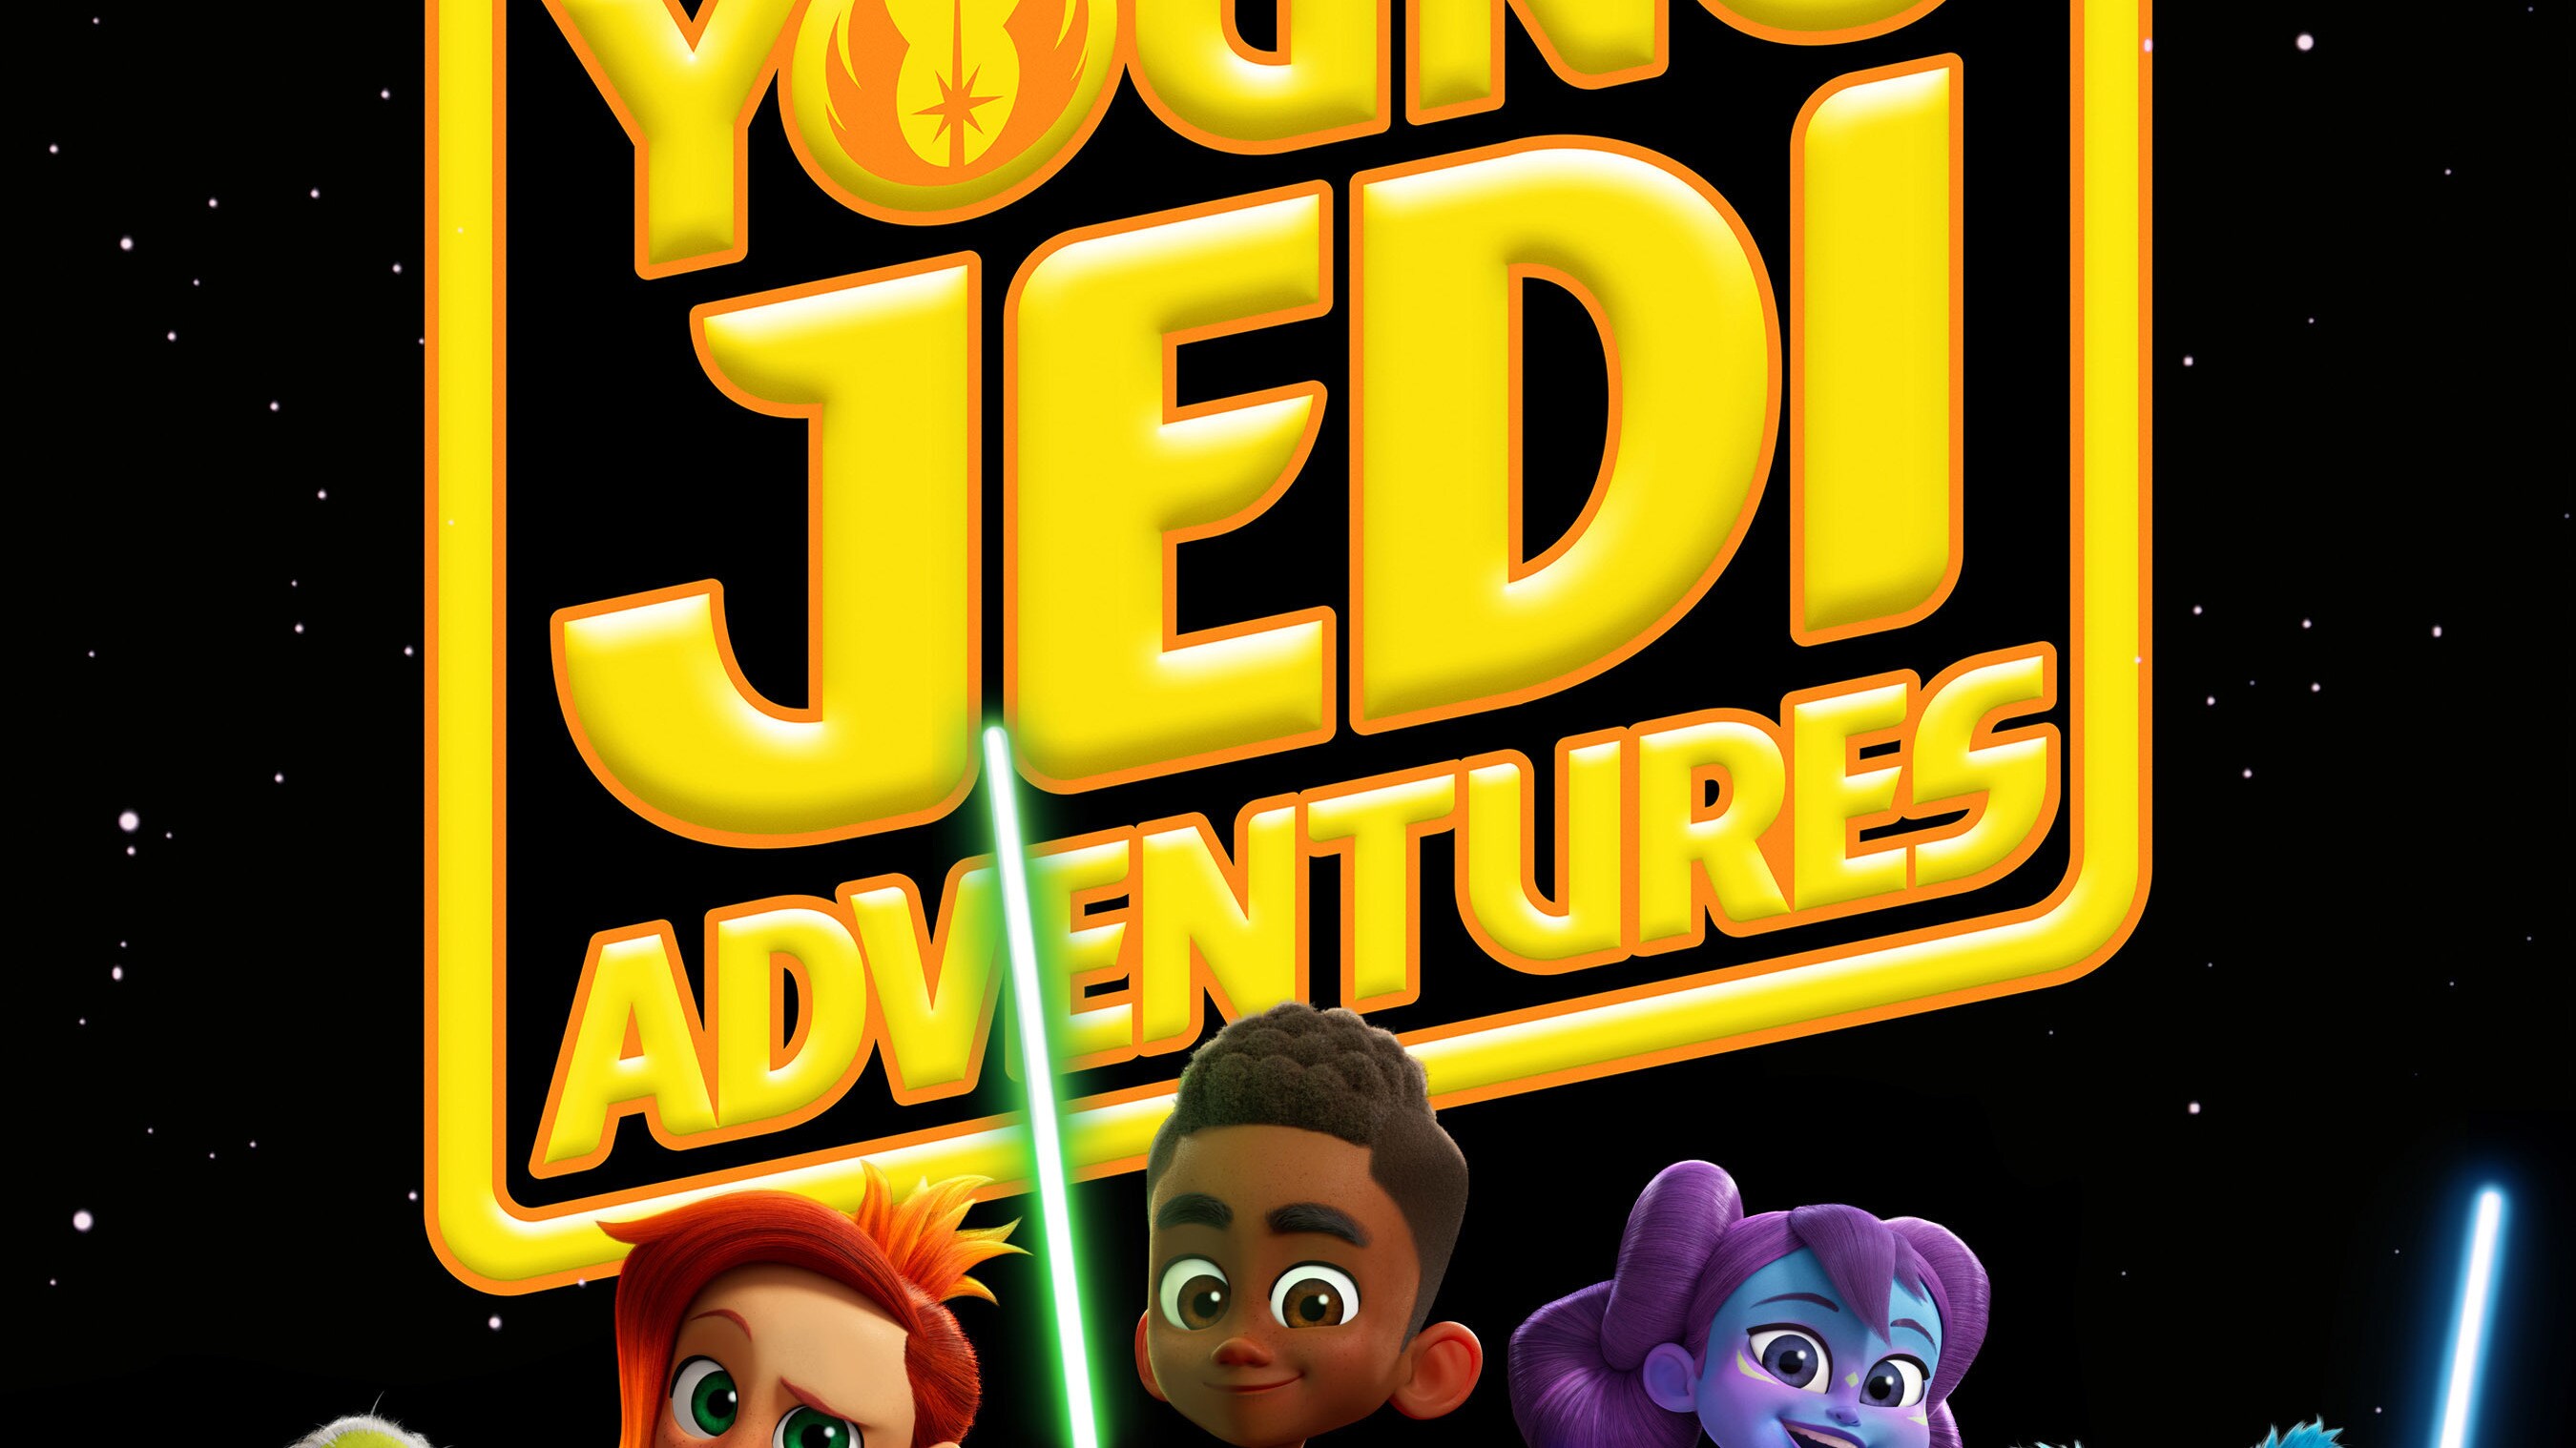 Star Wars: Young Jedi Adventures logo with characters.